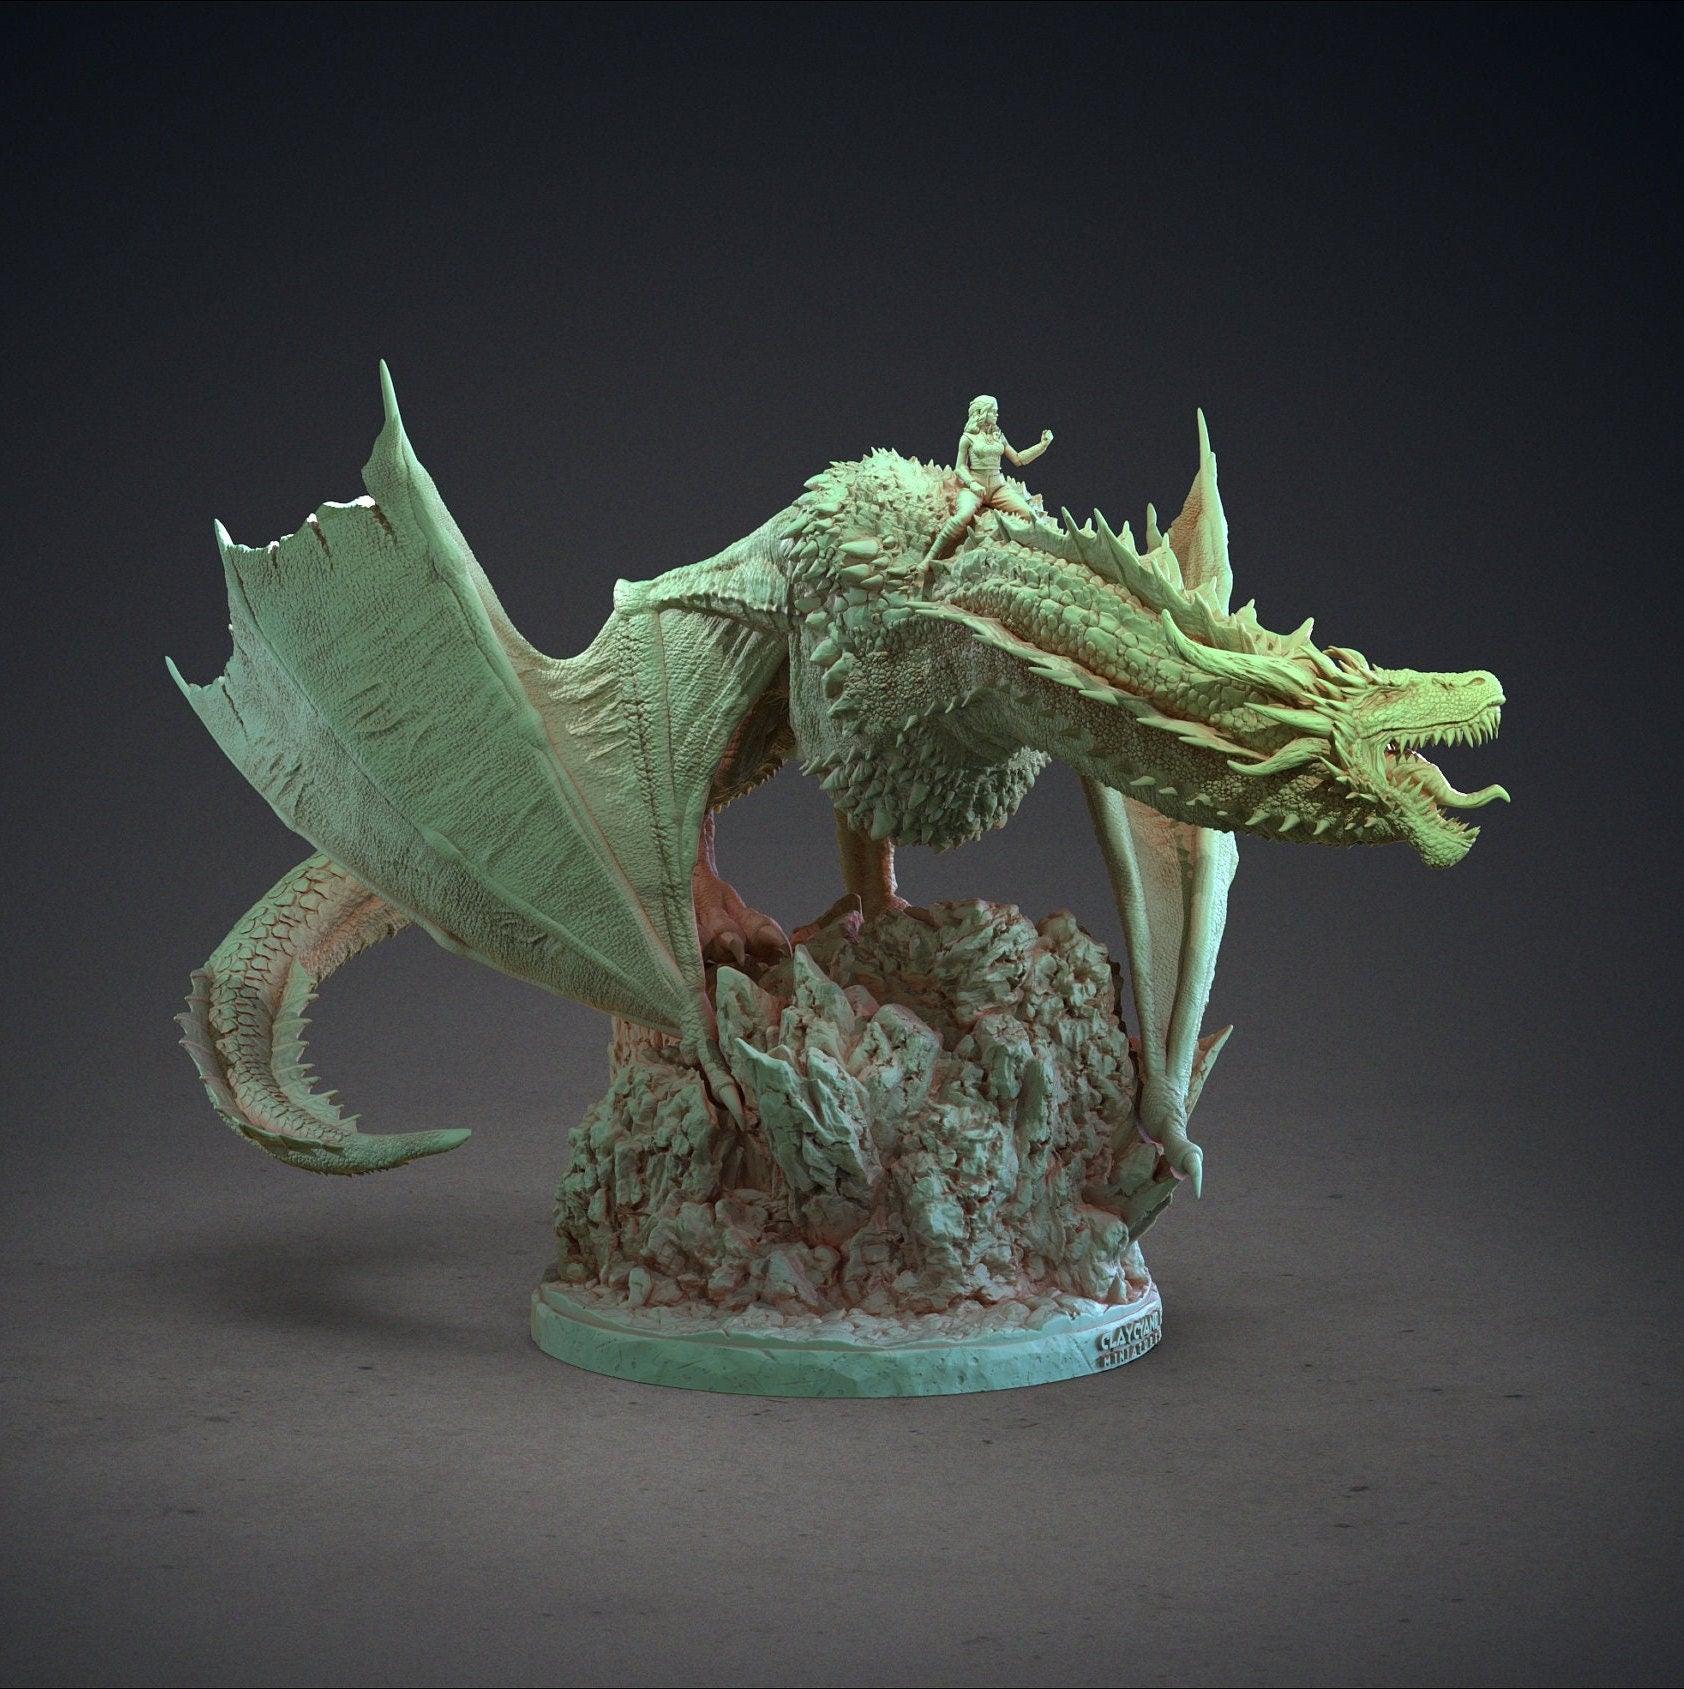 Queen of Dragons Miniature - Female Dragon Rider | DnD 5e Dragon Miniature | 32mm Scale - Plague Miniatures shop for DnD Miniatures